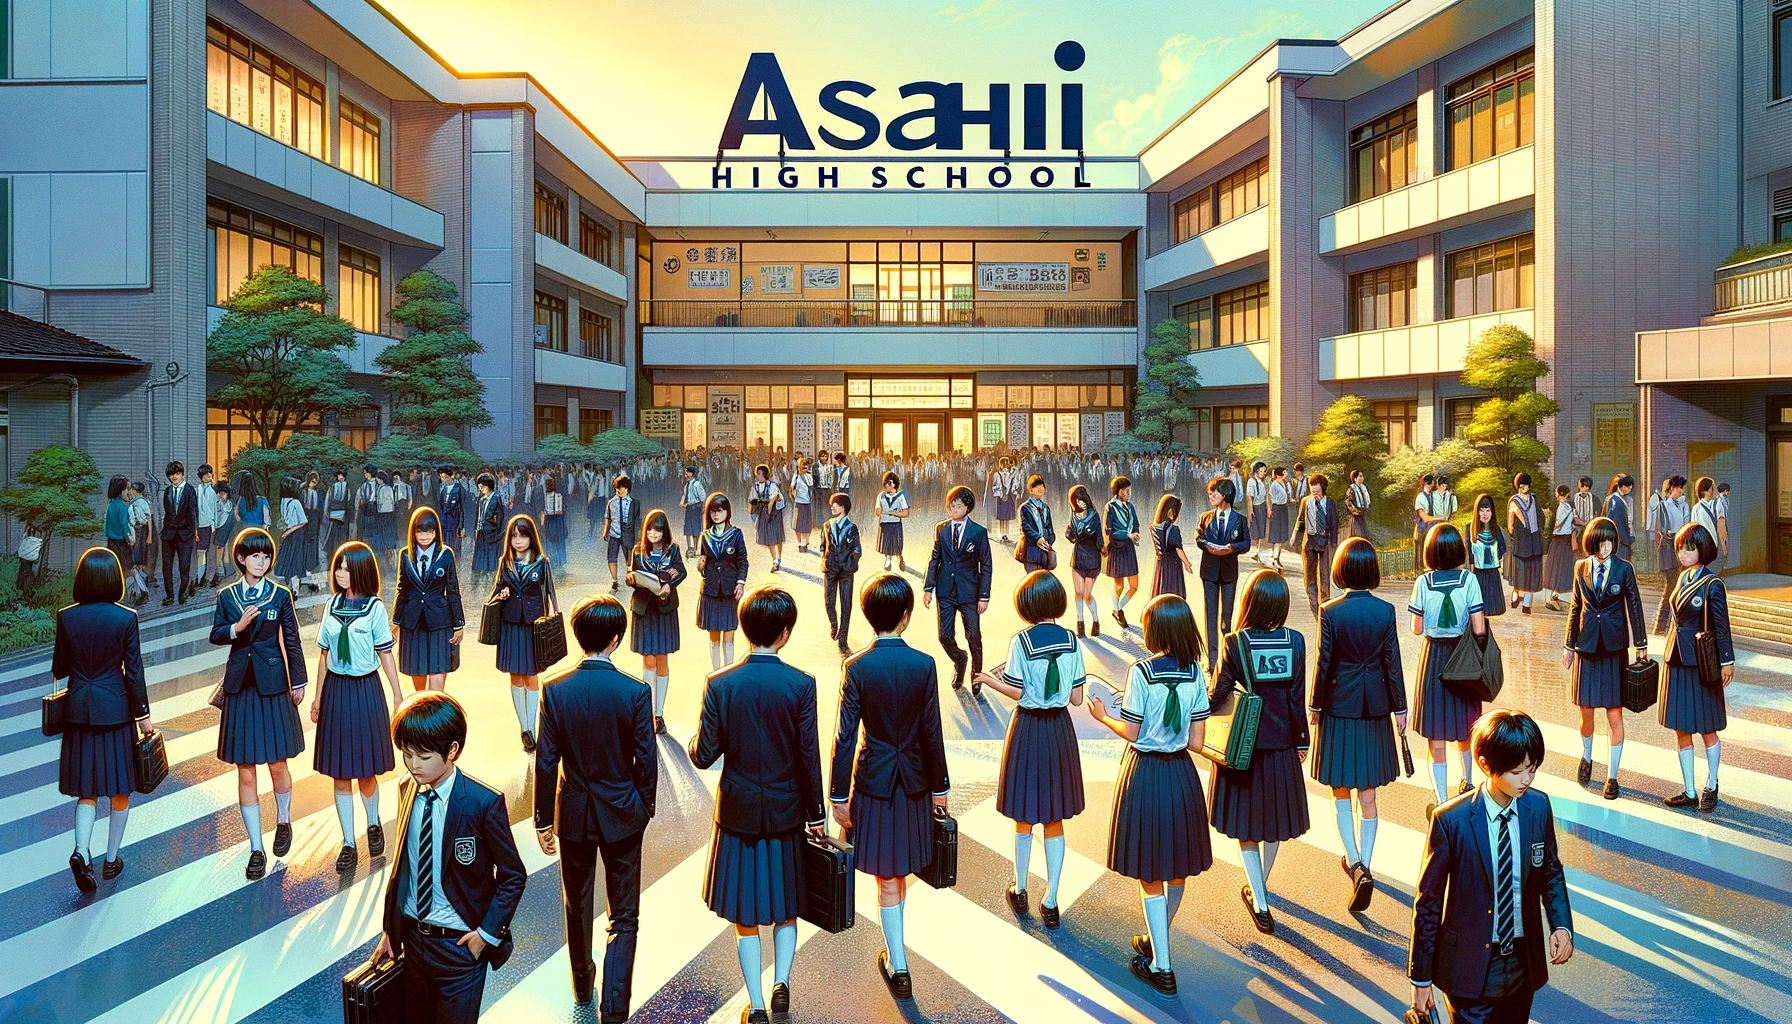 A vivid scene at Asahi High School focusing on students in uniforms, reflecting the school's popularity and disciplined environment. The image captures a group of students dressed in sharp, neat uniforms, engaged in various academic and social activities around the campus. Some are walking to class, others are gathered in small groups, discussing their projects. The background features the school's modern yet welcoming architecture, enhancing the scholarly atmosphere. The word 'ASAHI' is prominently displayed, underlining the school's proud identity and strong educational values.